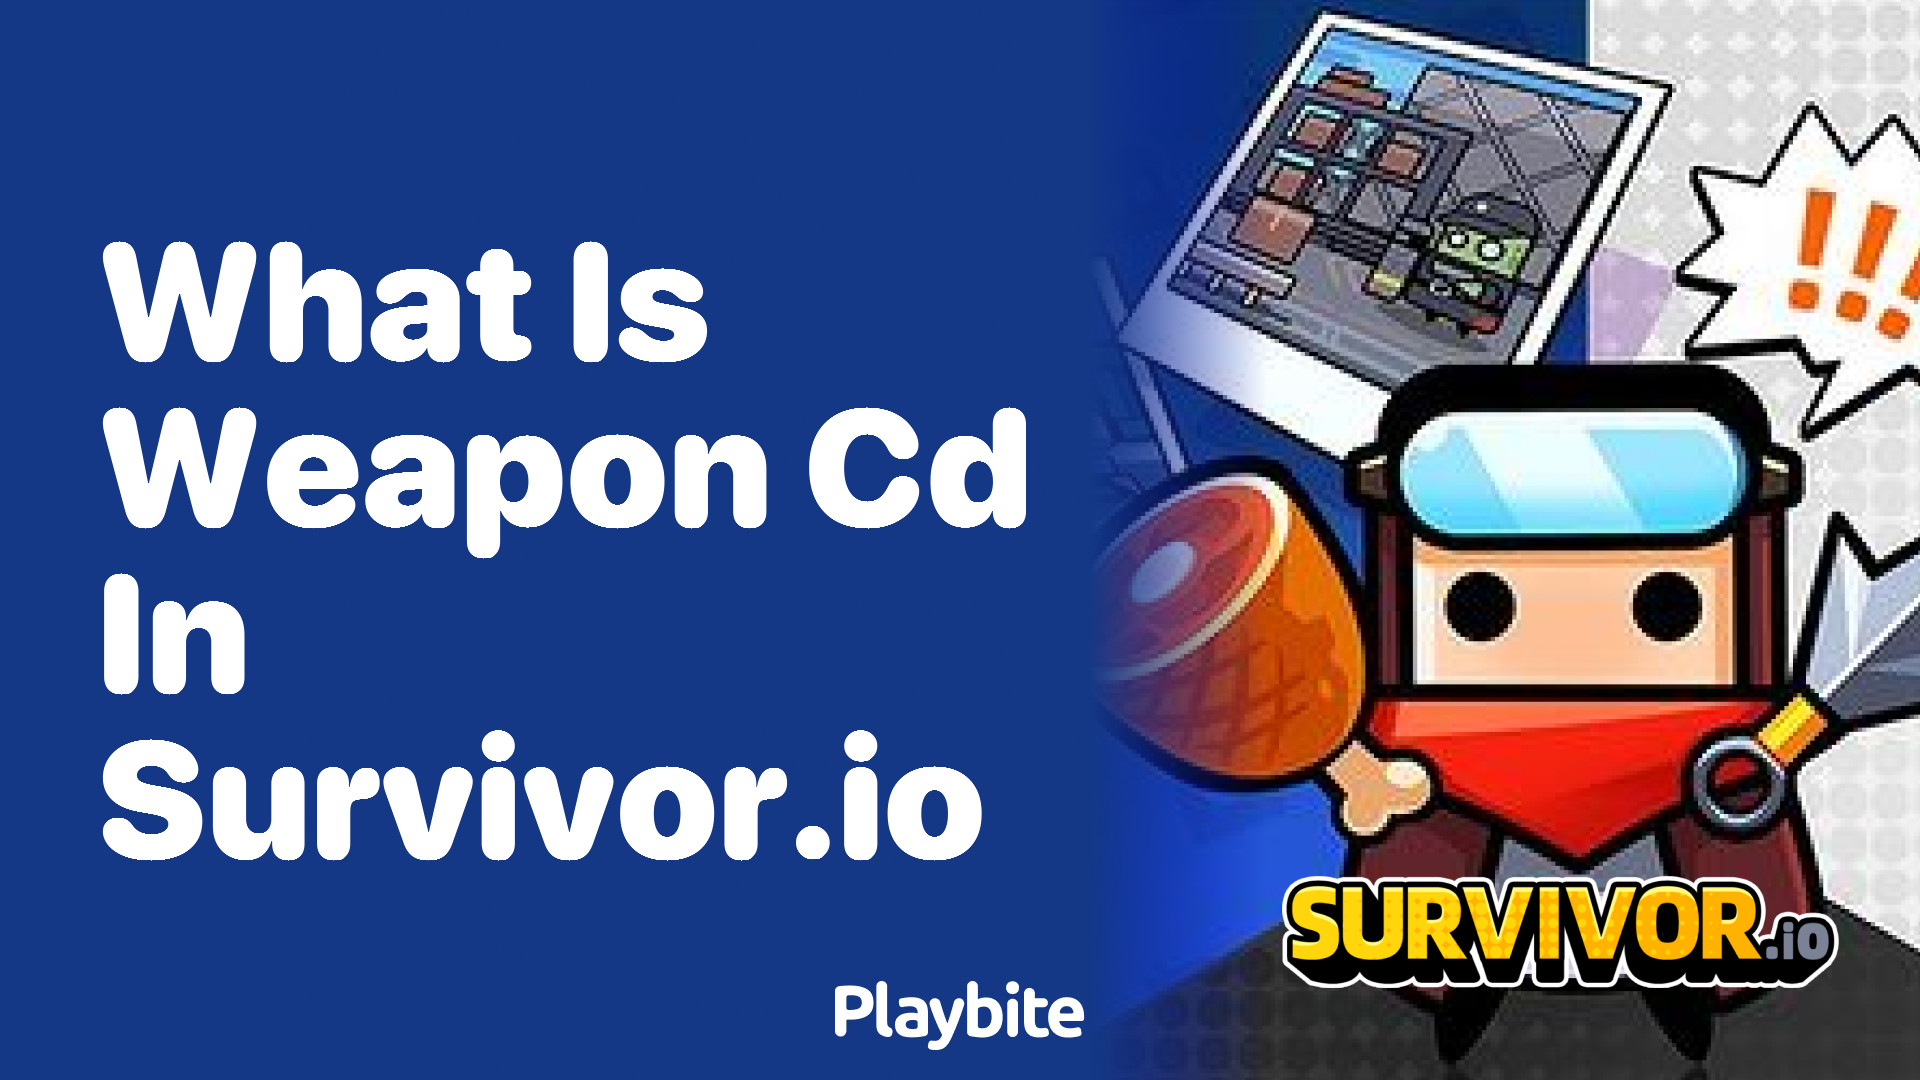 What is Weapon CD in Survivor.io?